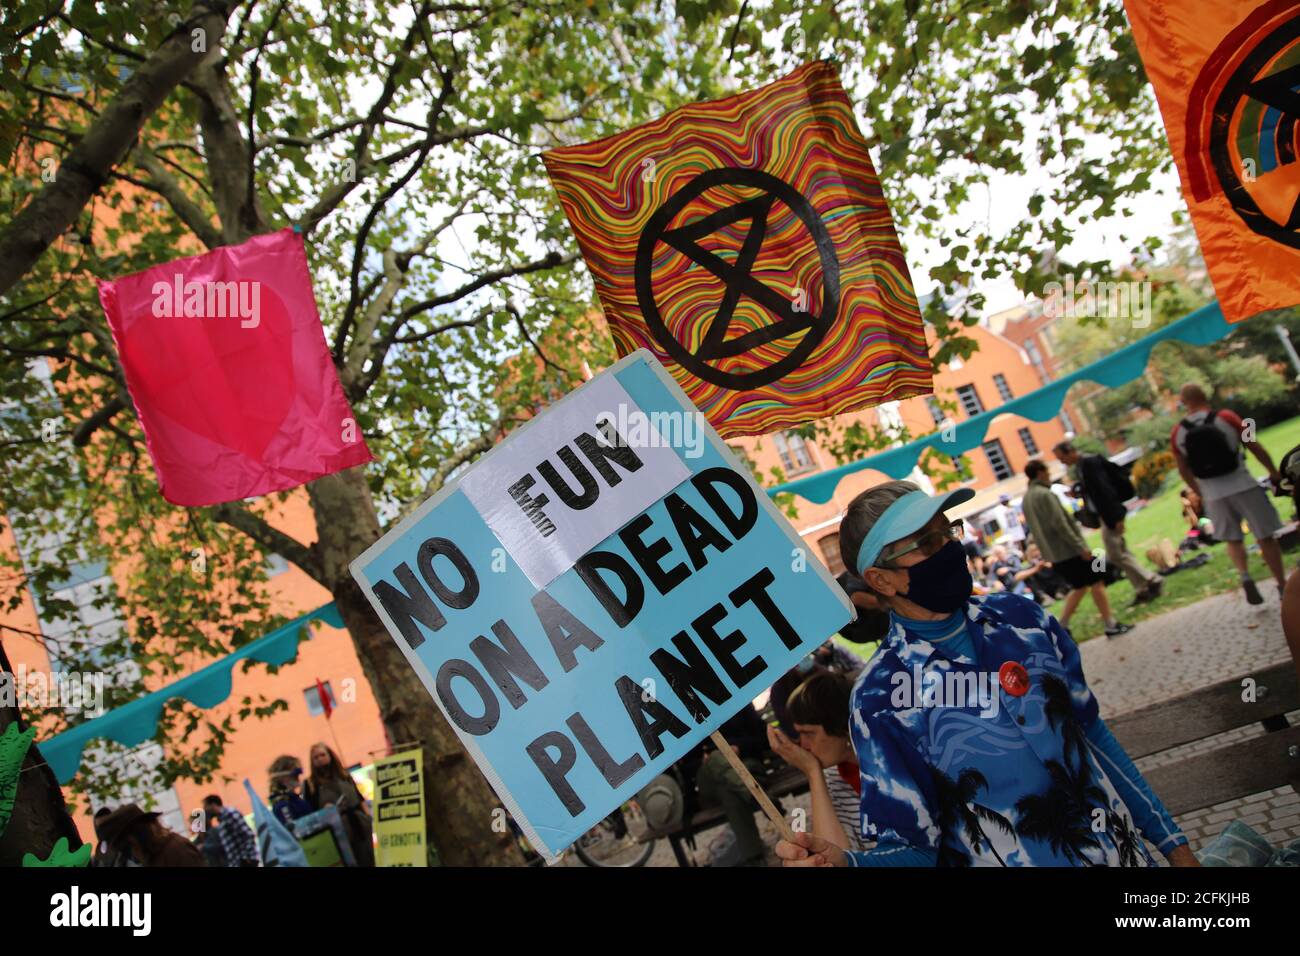 London, UK. 06th Sep, 2020. Extinction Rebellion hold a Flood Alert beach party to highlight the threat of rising tides and the risk of widespread flooding at Oxo Tower Wharf, London, 6th September 2020. Flags with XR symbols hang on the trees and a protestor holds a banner saying no fun on a dead planet Credit: Denise Laura Baker/Alamy Live News Stock Photo